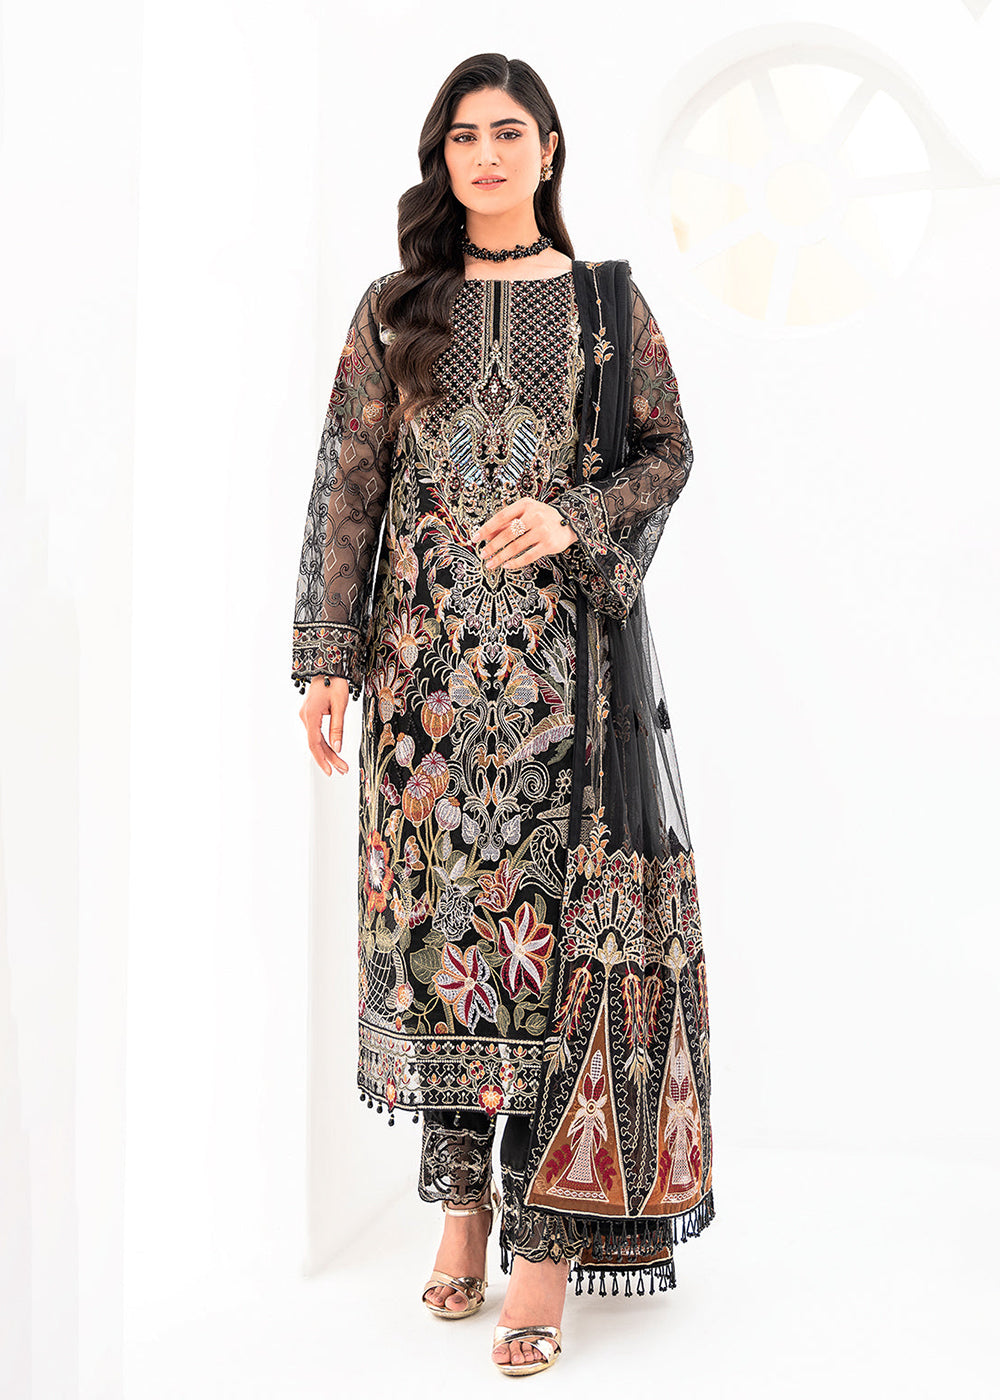 Buy Now Black Organza Suit - Ramsha Minhal Collection Vol 8 - #M-803 Online in USA, UK, Canada & Worldwide at Empress Clothing. 